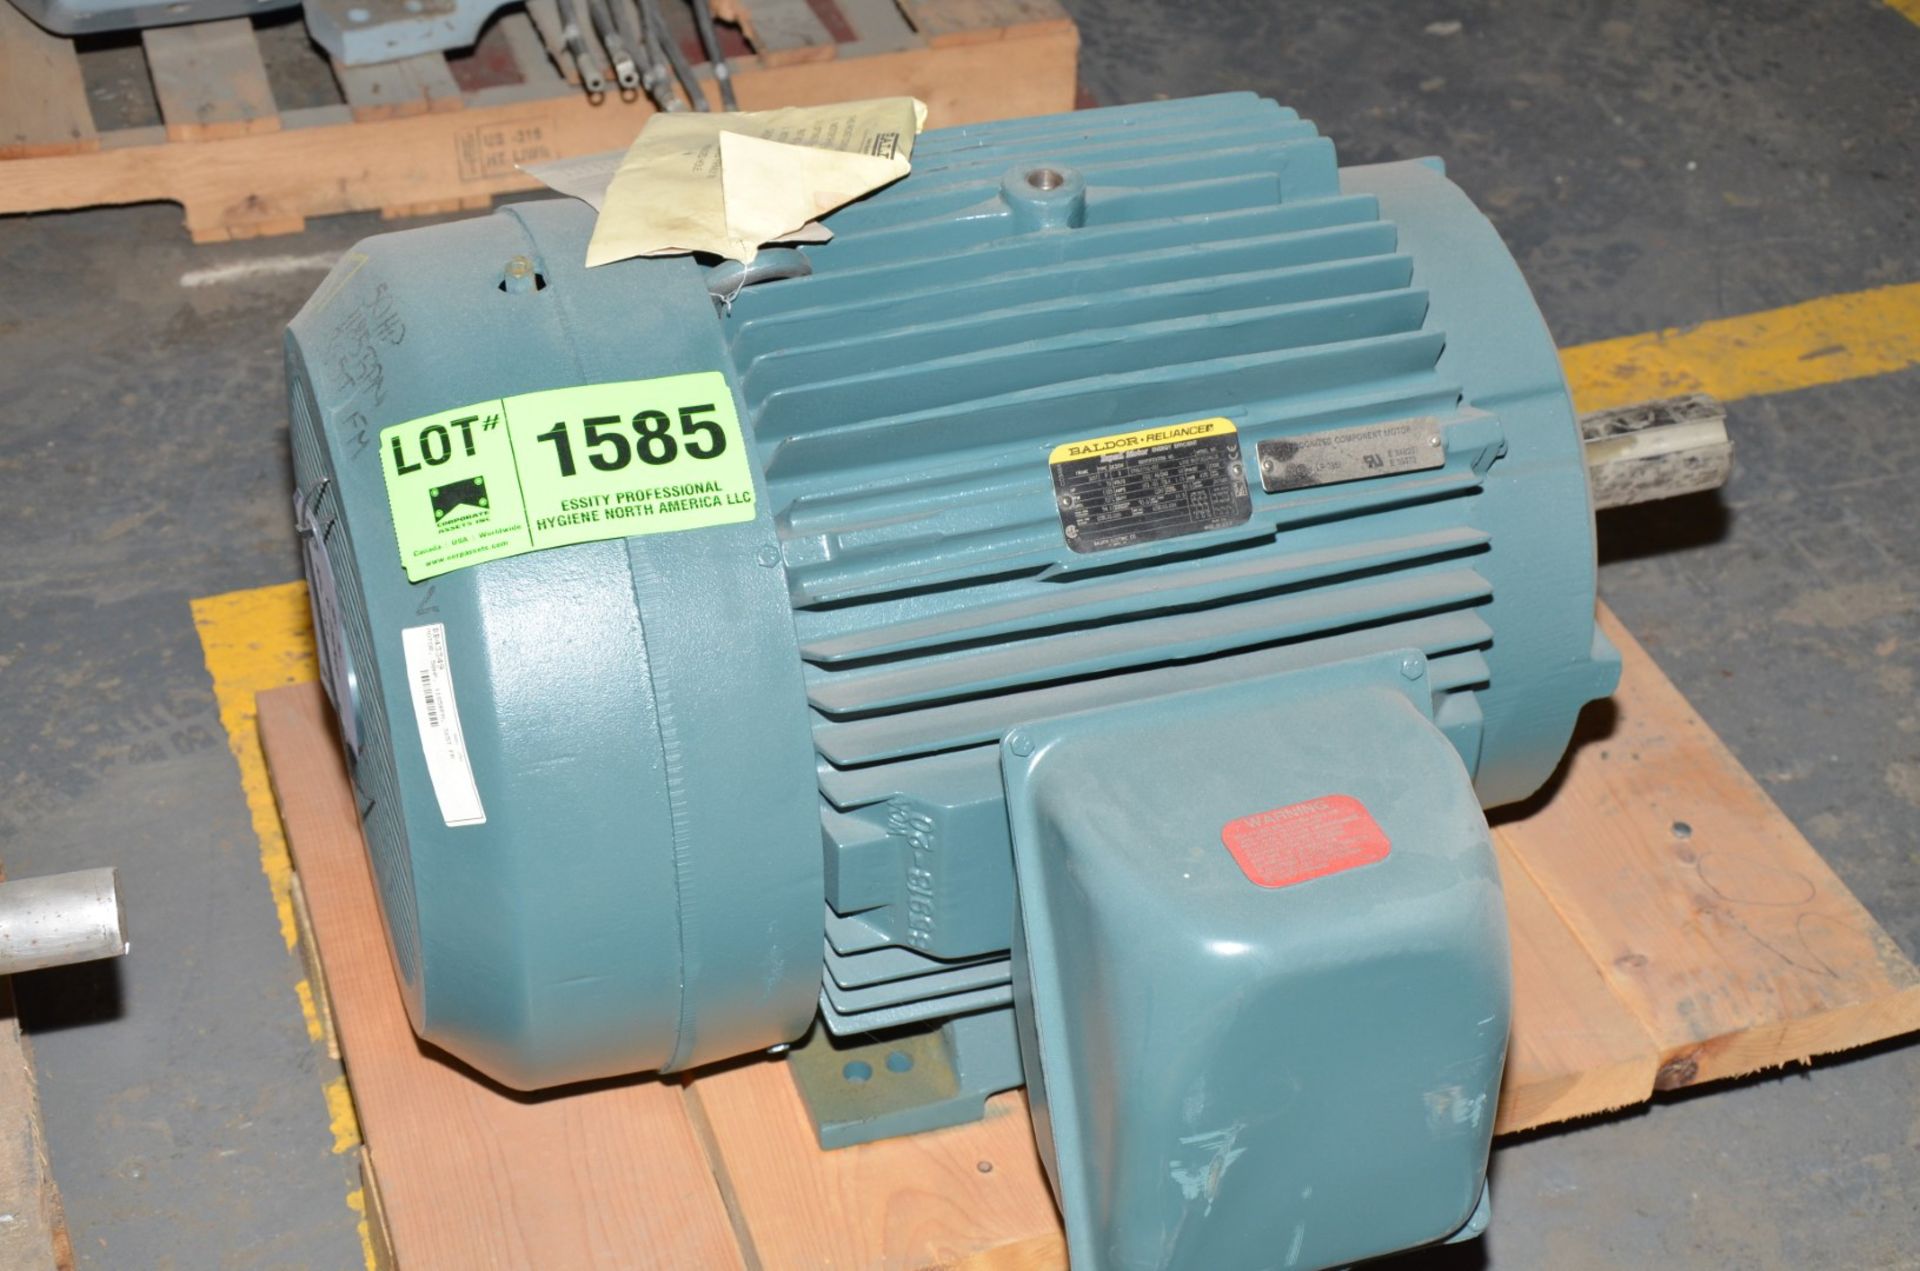 BALDOR 50 HP 1185 RPM ELECTRIC MOTOR [RIGGING FEE FOR LOT #1585 - $50 USD PLUS APPLICABLE TAXES]